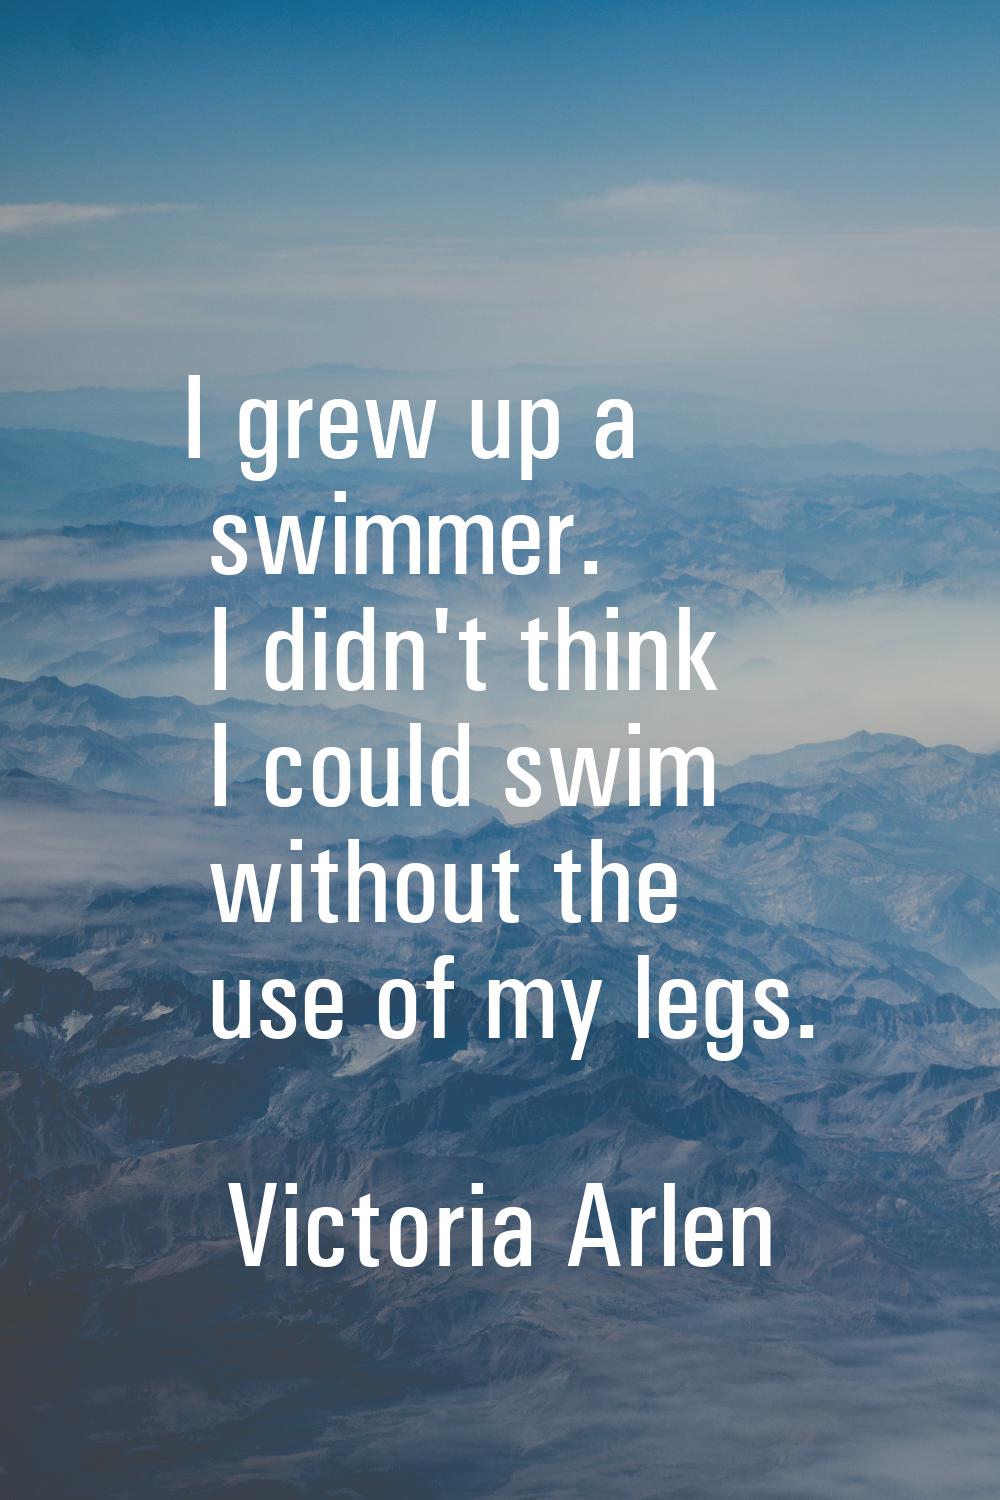 I grew up a swimmer. I didn't think I could swim without the use of my legs.